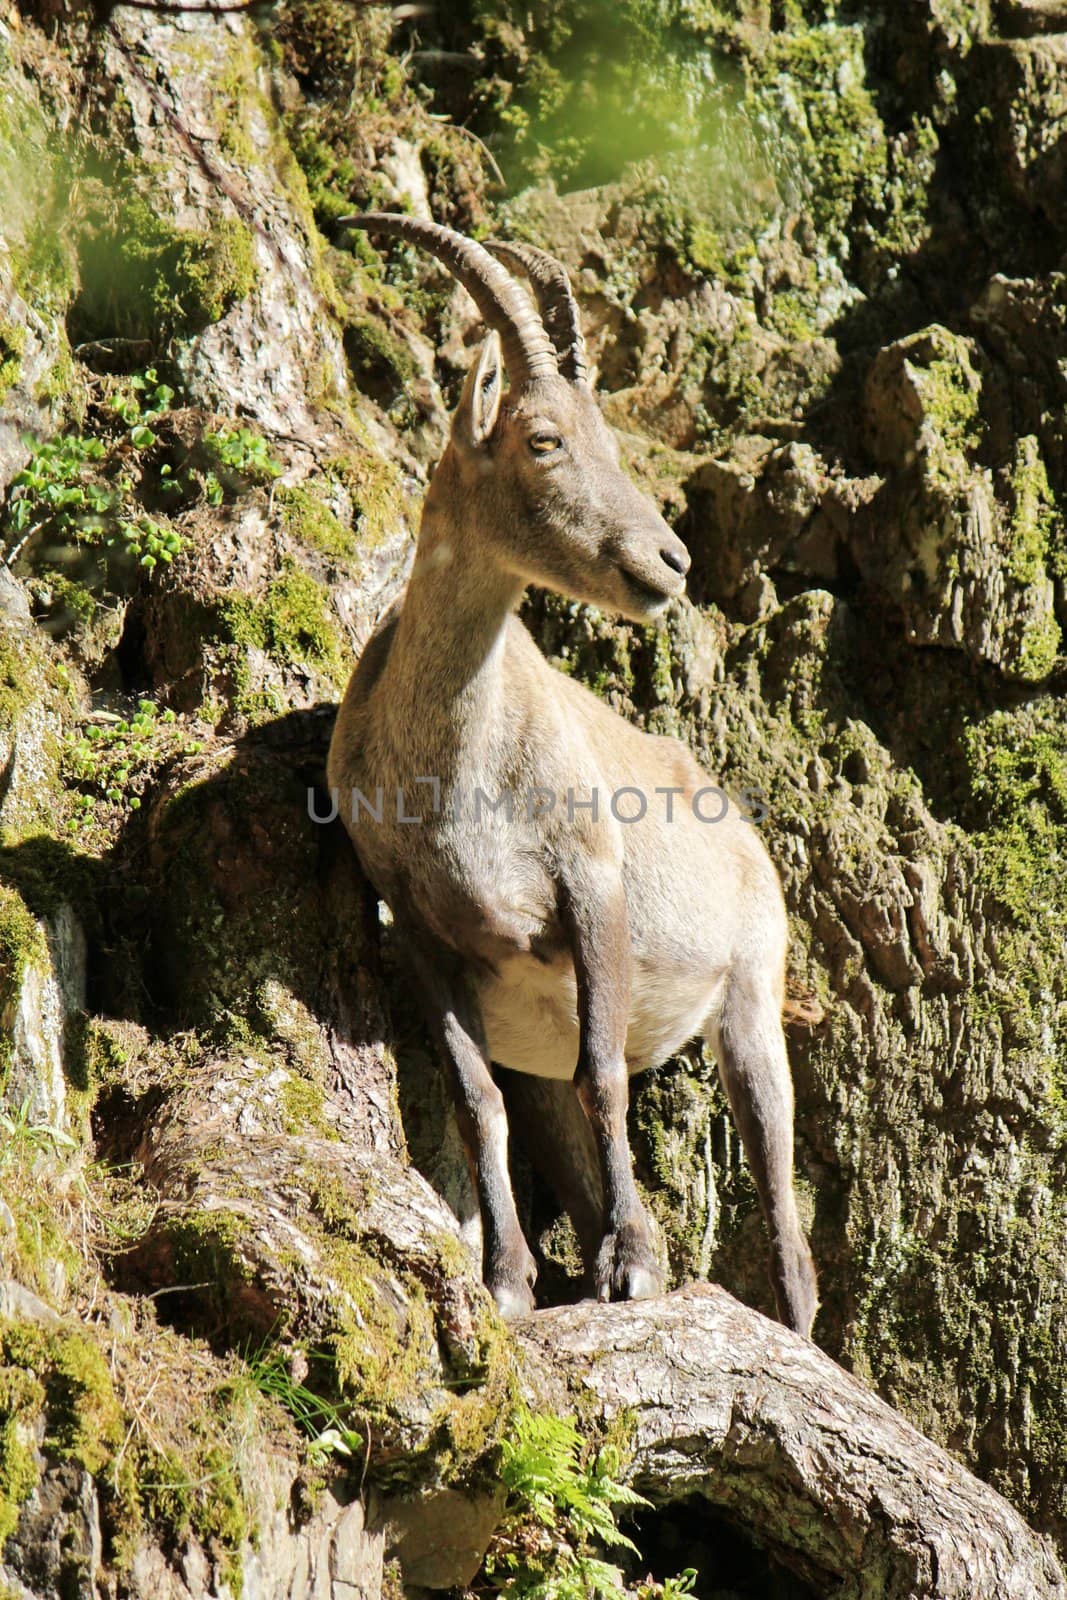 Ibex standing on a trunk in a rocky mountain